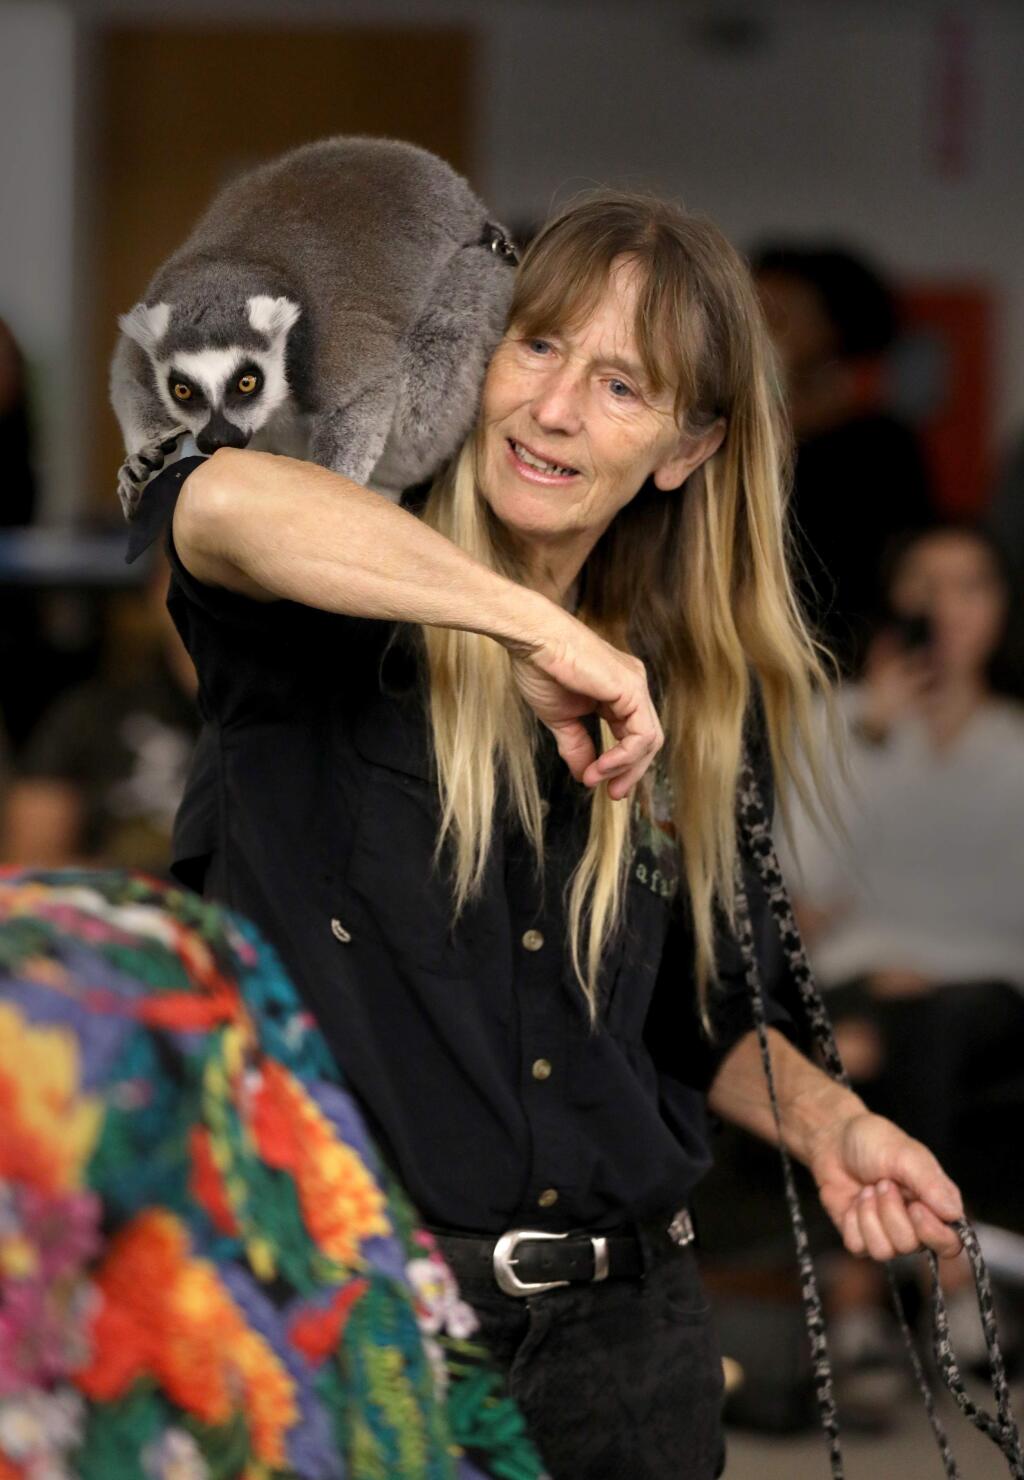 Bonnie Cromwell, owner and educational director of Classroom Safari, handles Riccochet, a ring-tailed lemur, during a presentation in the library at Casa Grande High School in Petaluma on Tuesday, Nov. 5, 2019. (BETH SCHLANKER/ The Press Democrat)